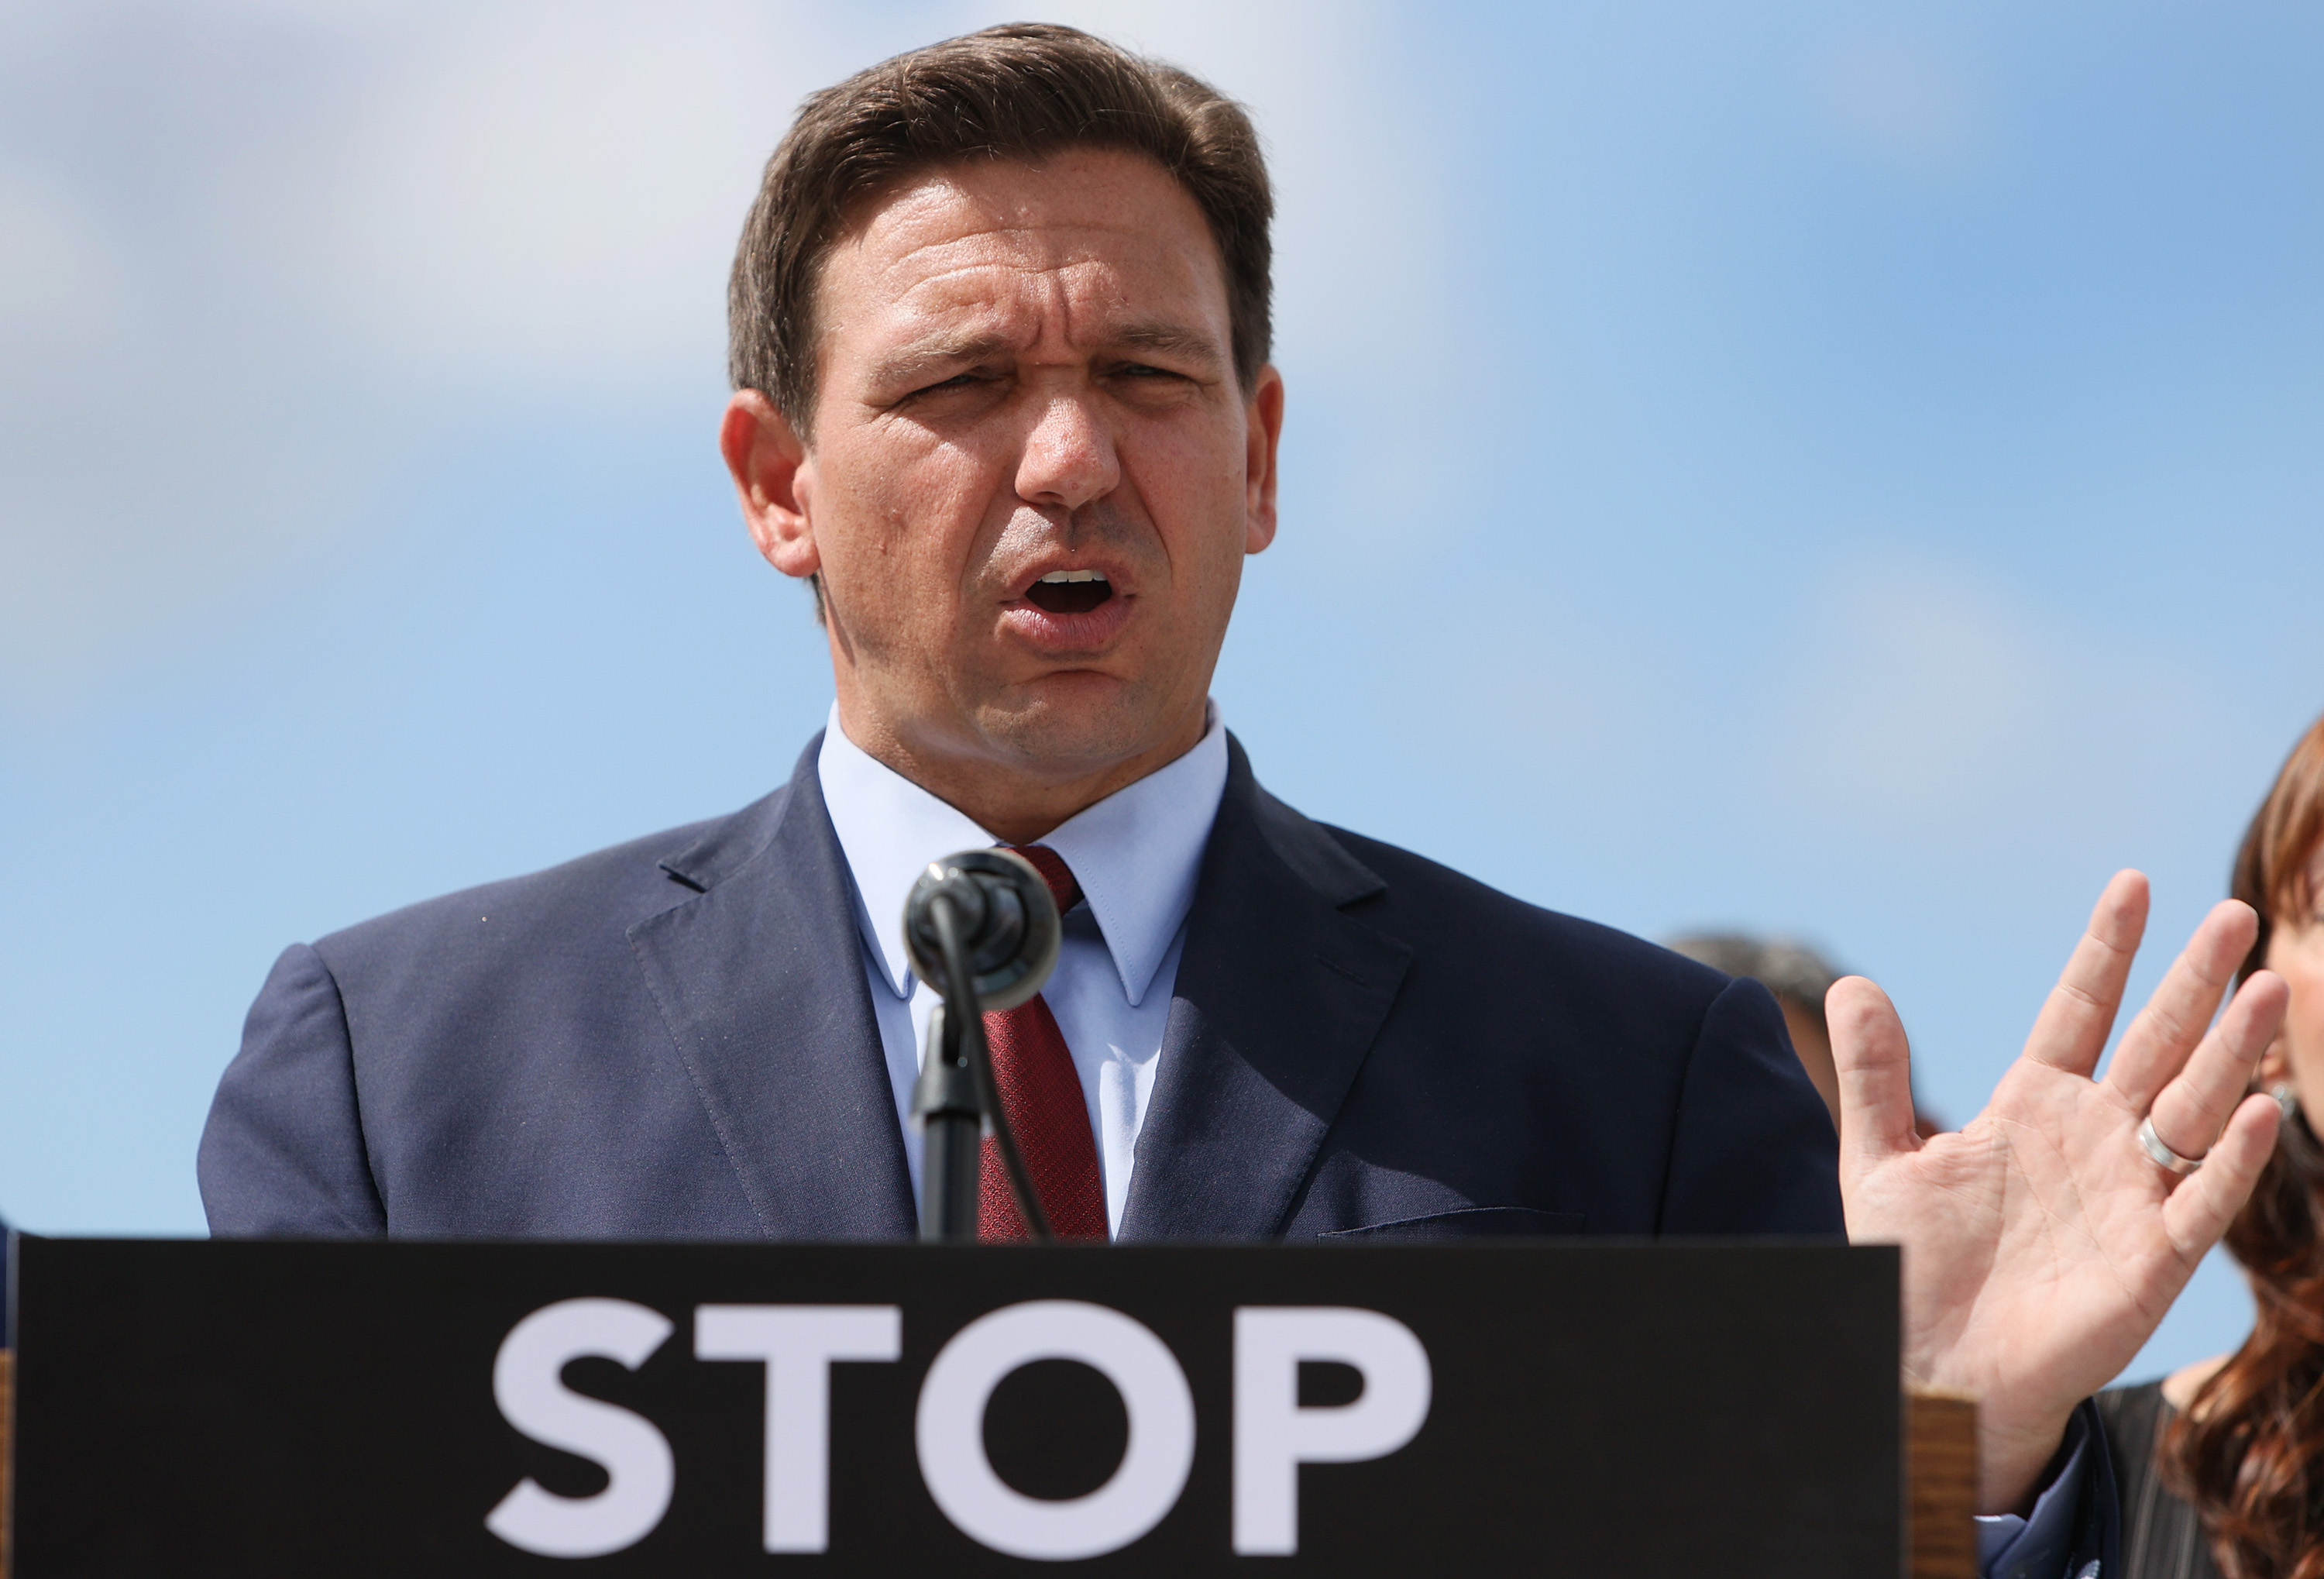 Florida Gov. Ron DeSantis speaks during a press conference held at the Florida National Guard Robert A. Ballard Armory on June 7, 2021 in Miami, Florida. The word “stop” is visible on the lectern.